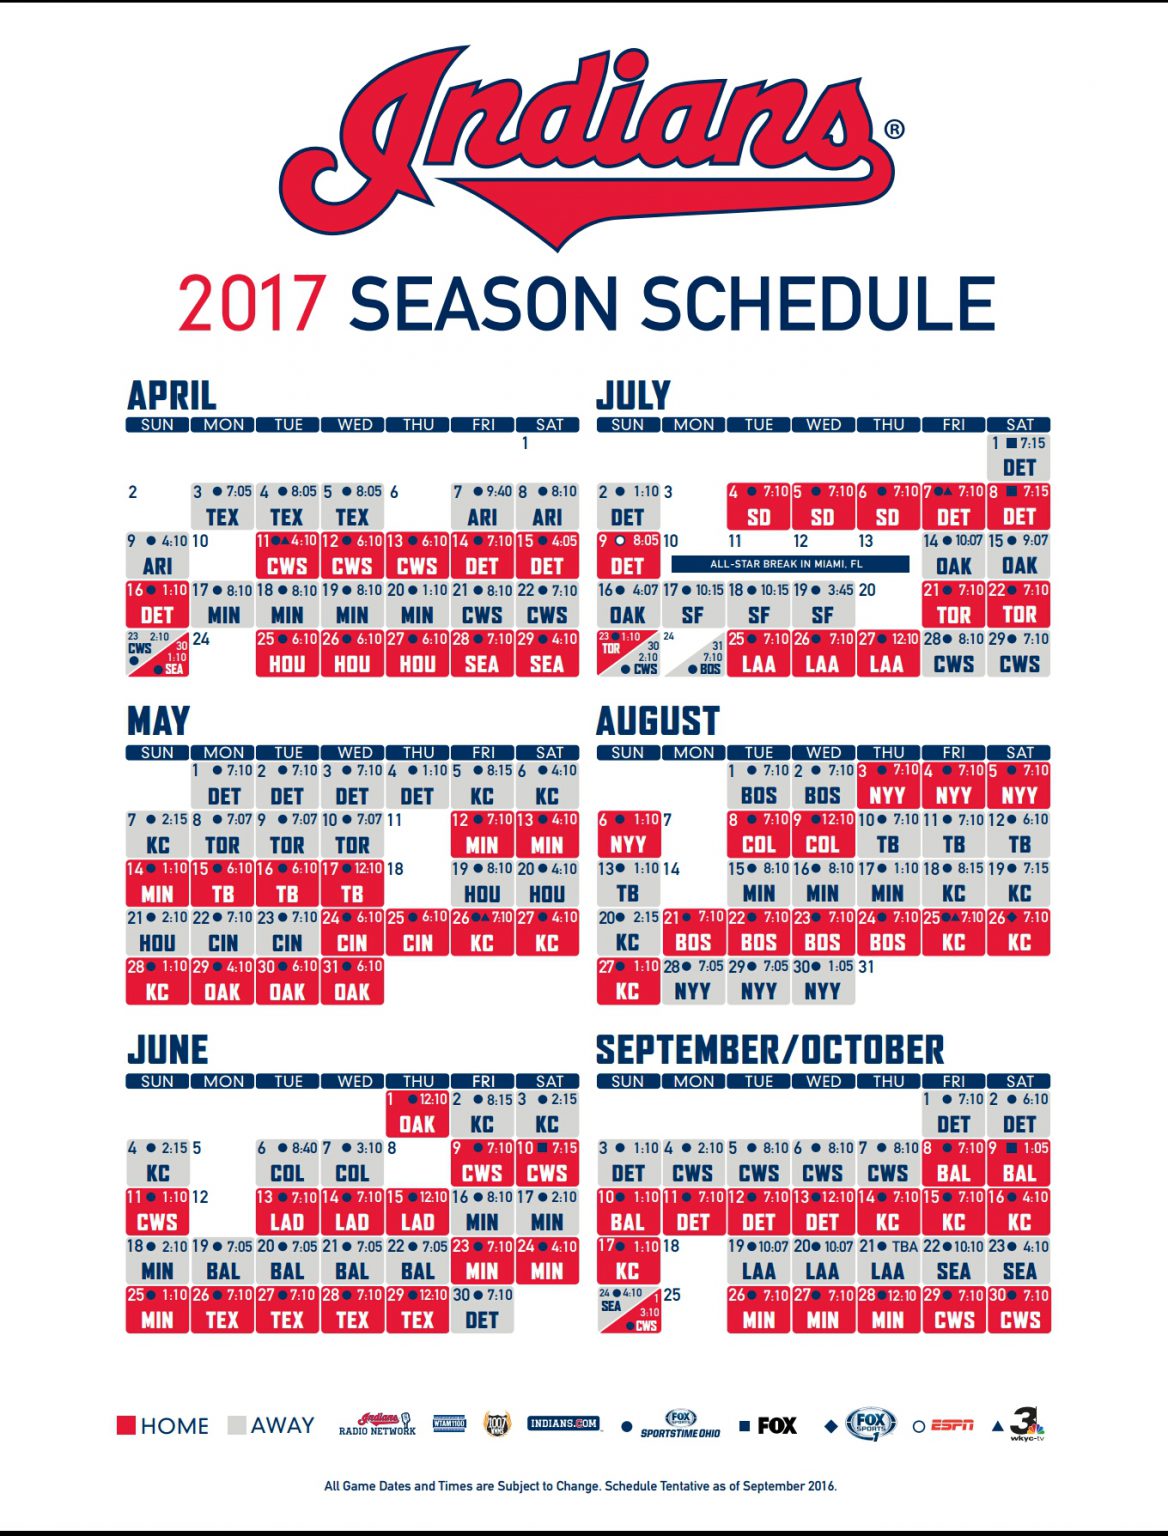 Cleveland Indians Announce Game Times and Broadcast Schedule for 2017 Season